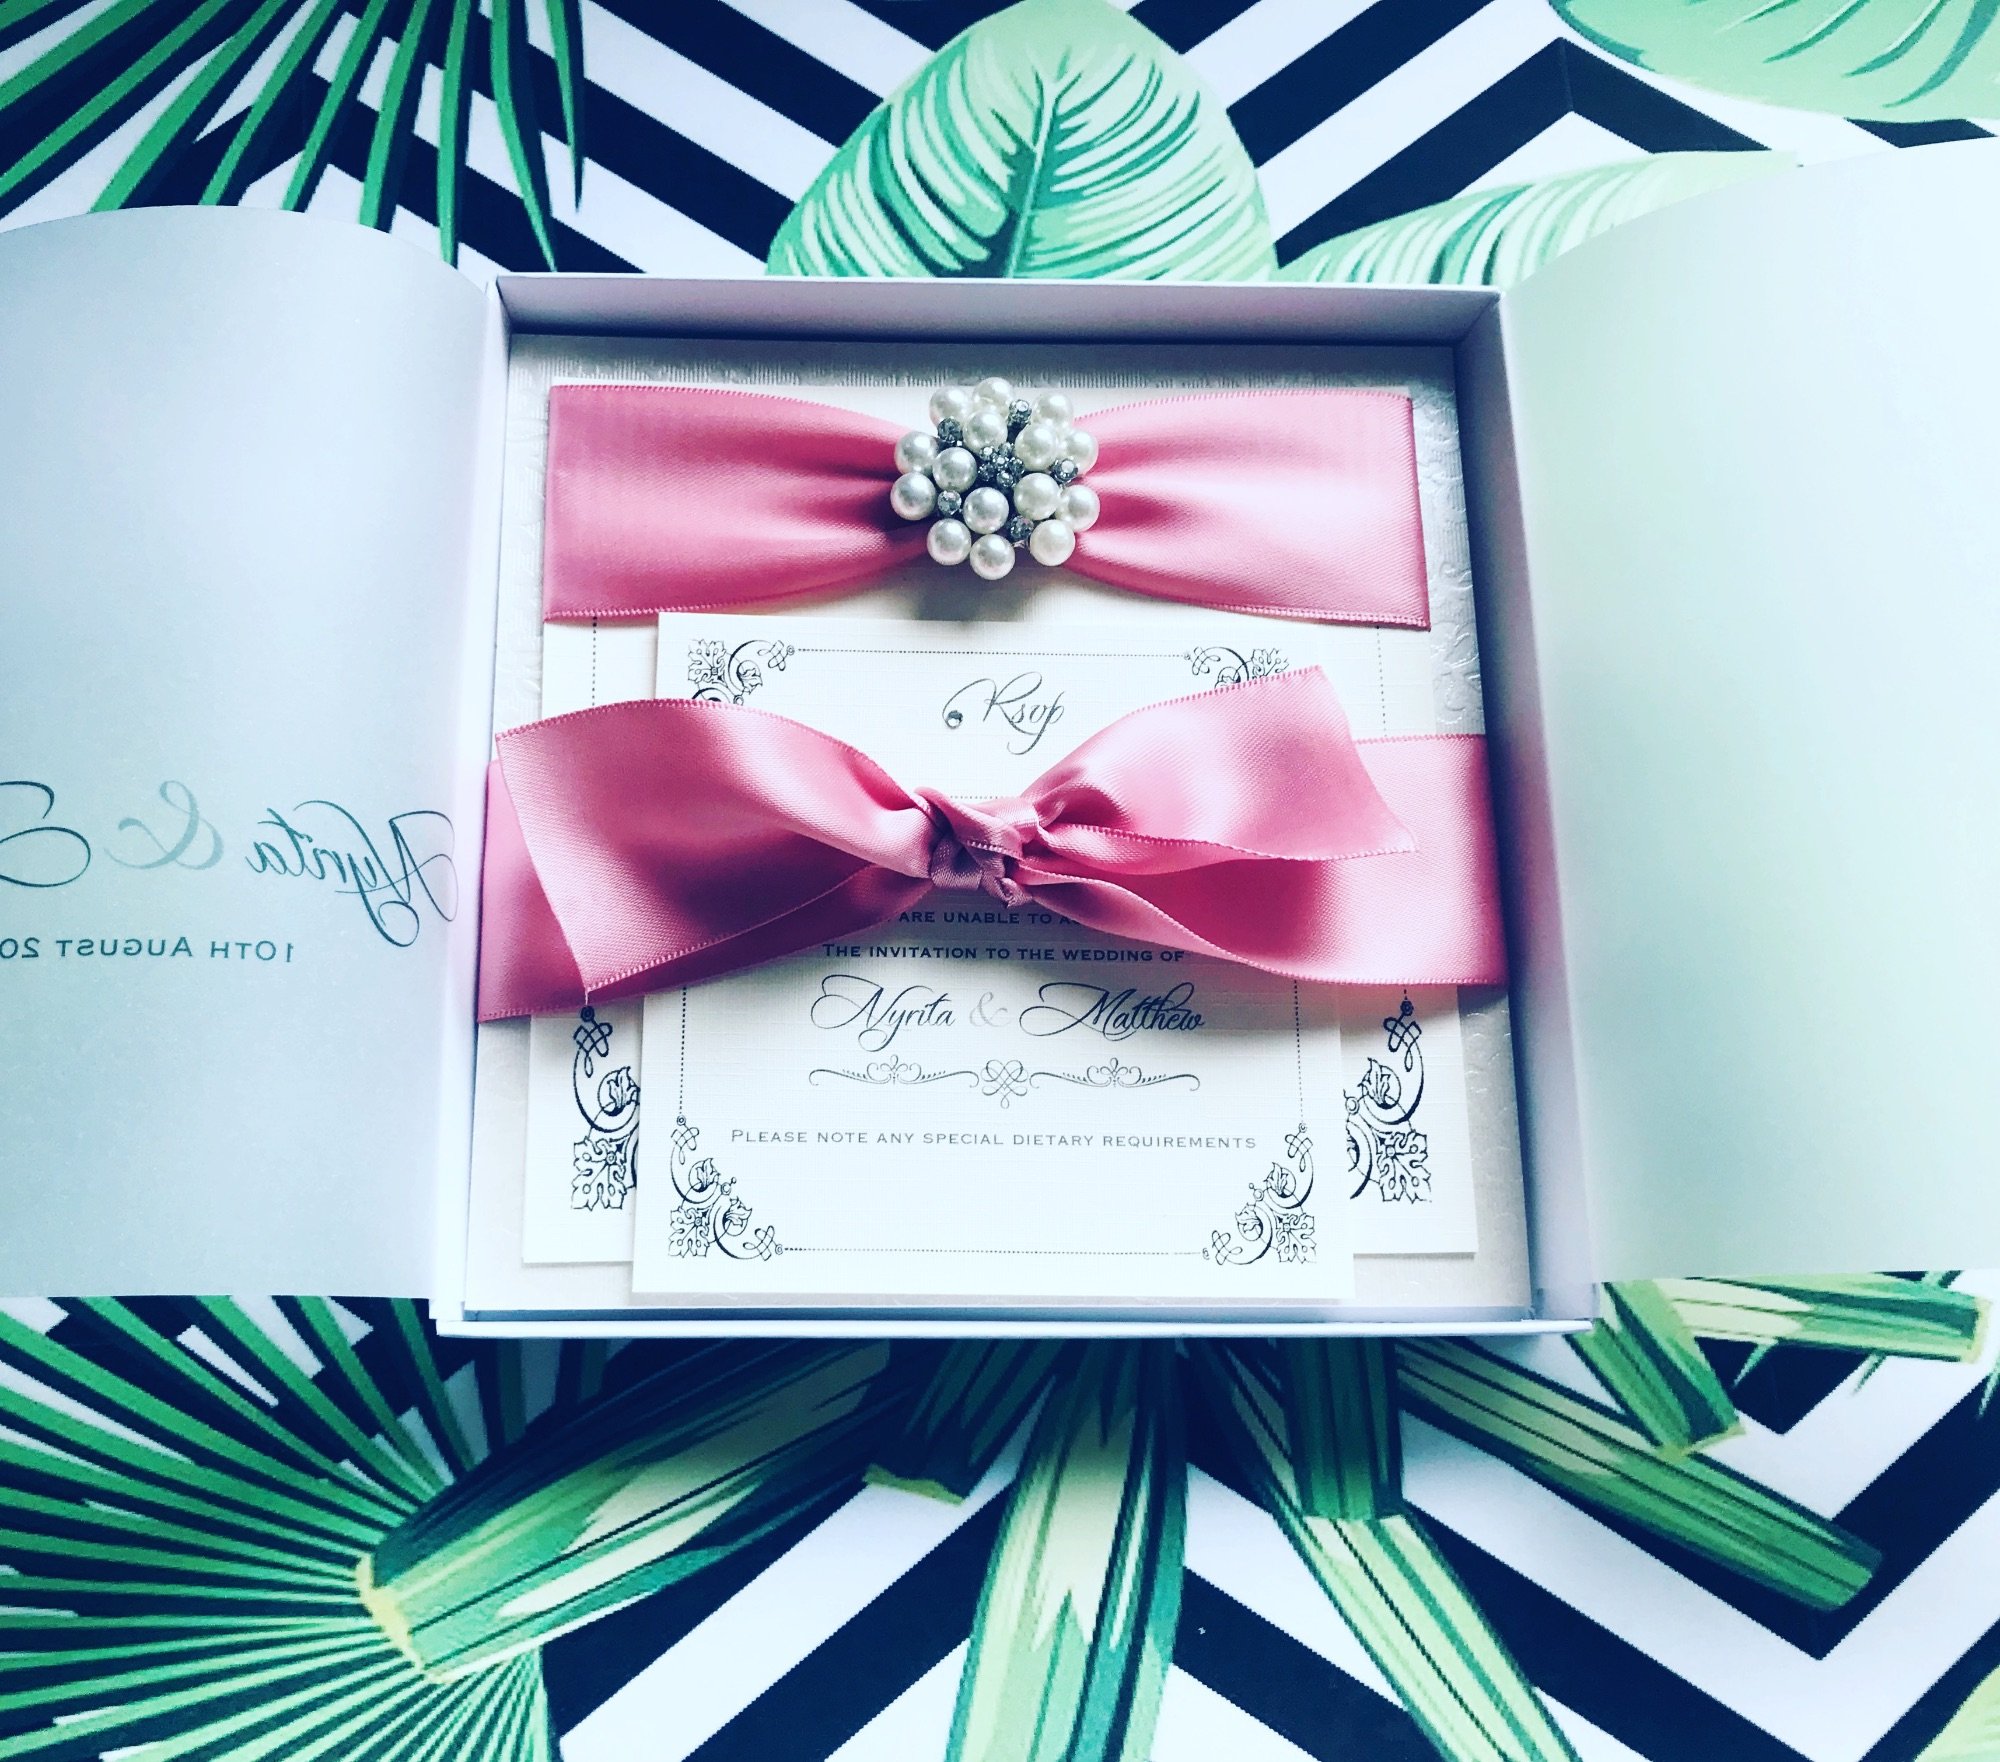 Postcard style boxed wedding invitation with brooch